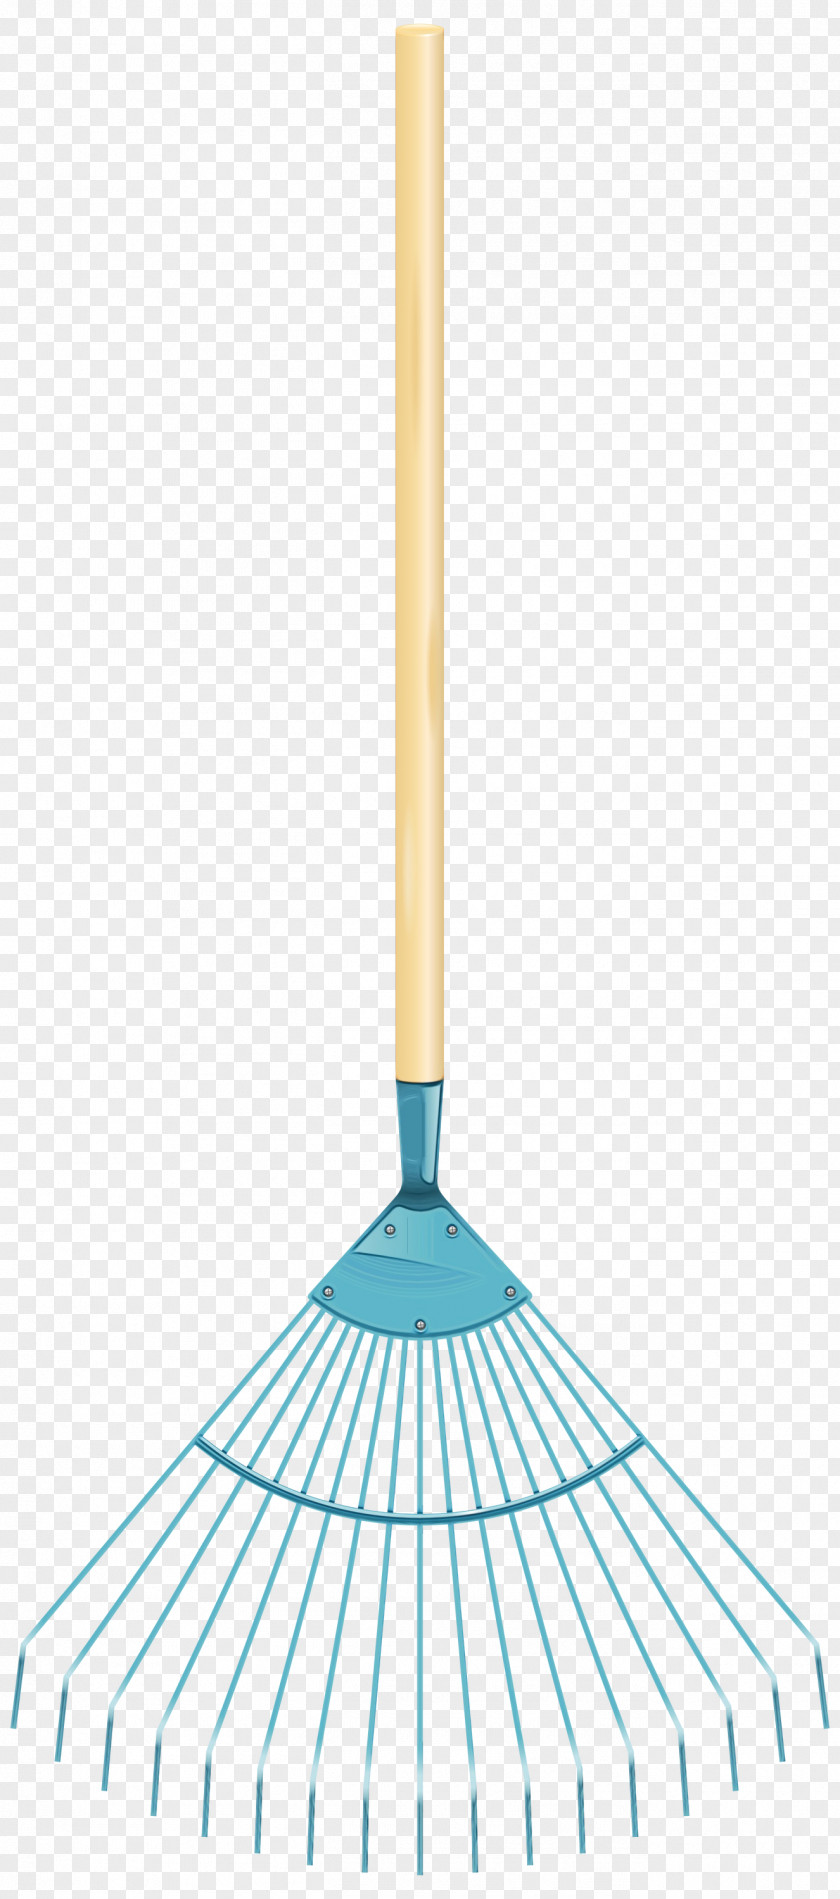 Rake Broom Angle Household Cleaning Supply PNG